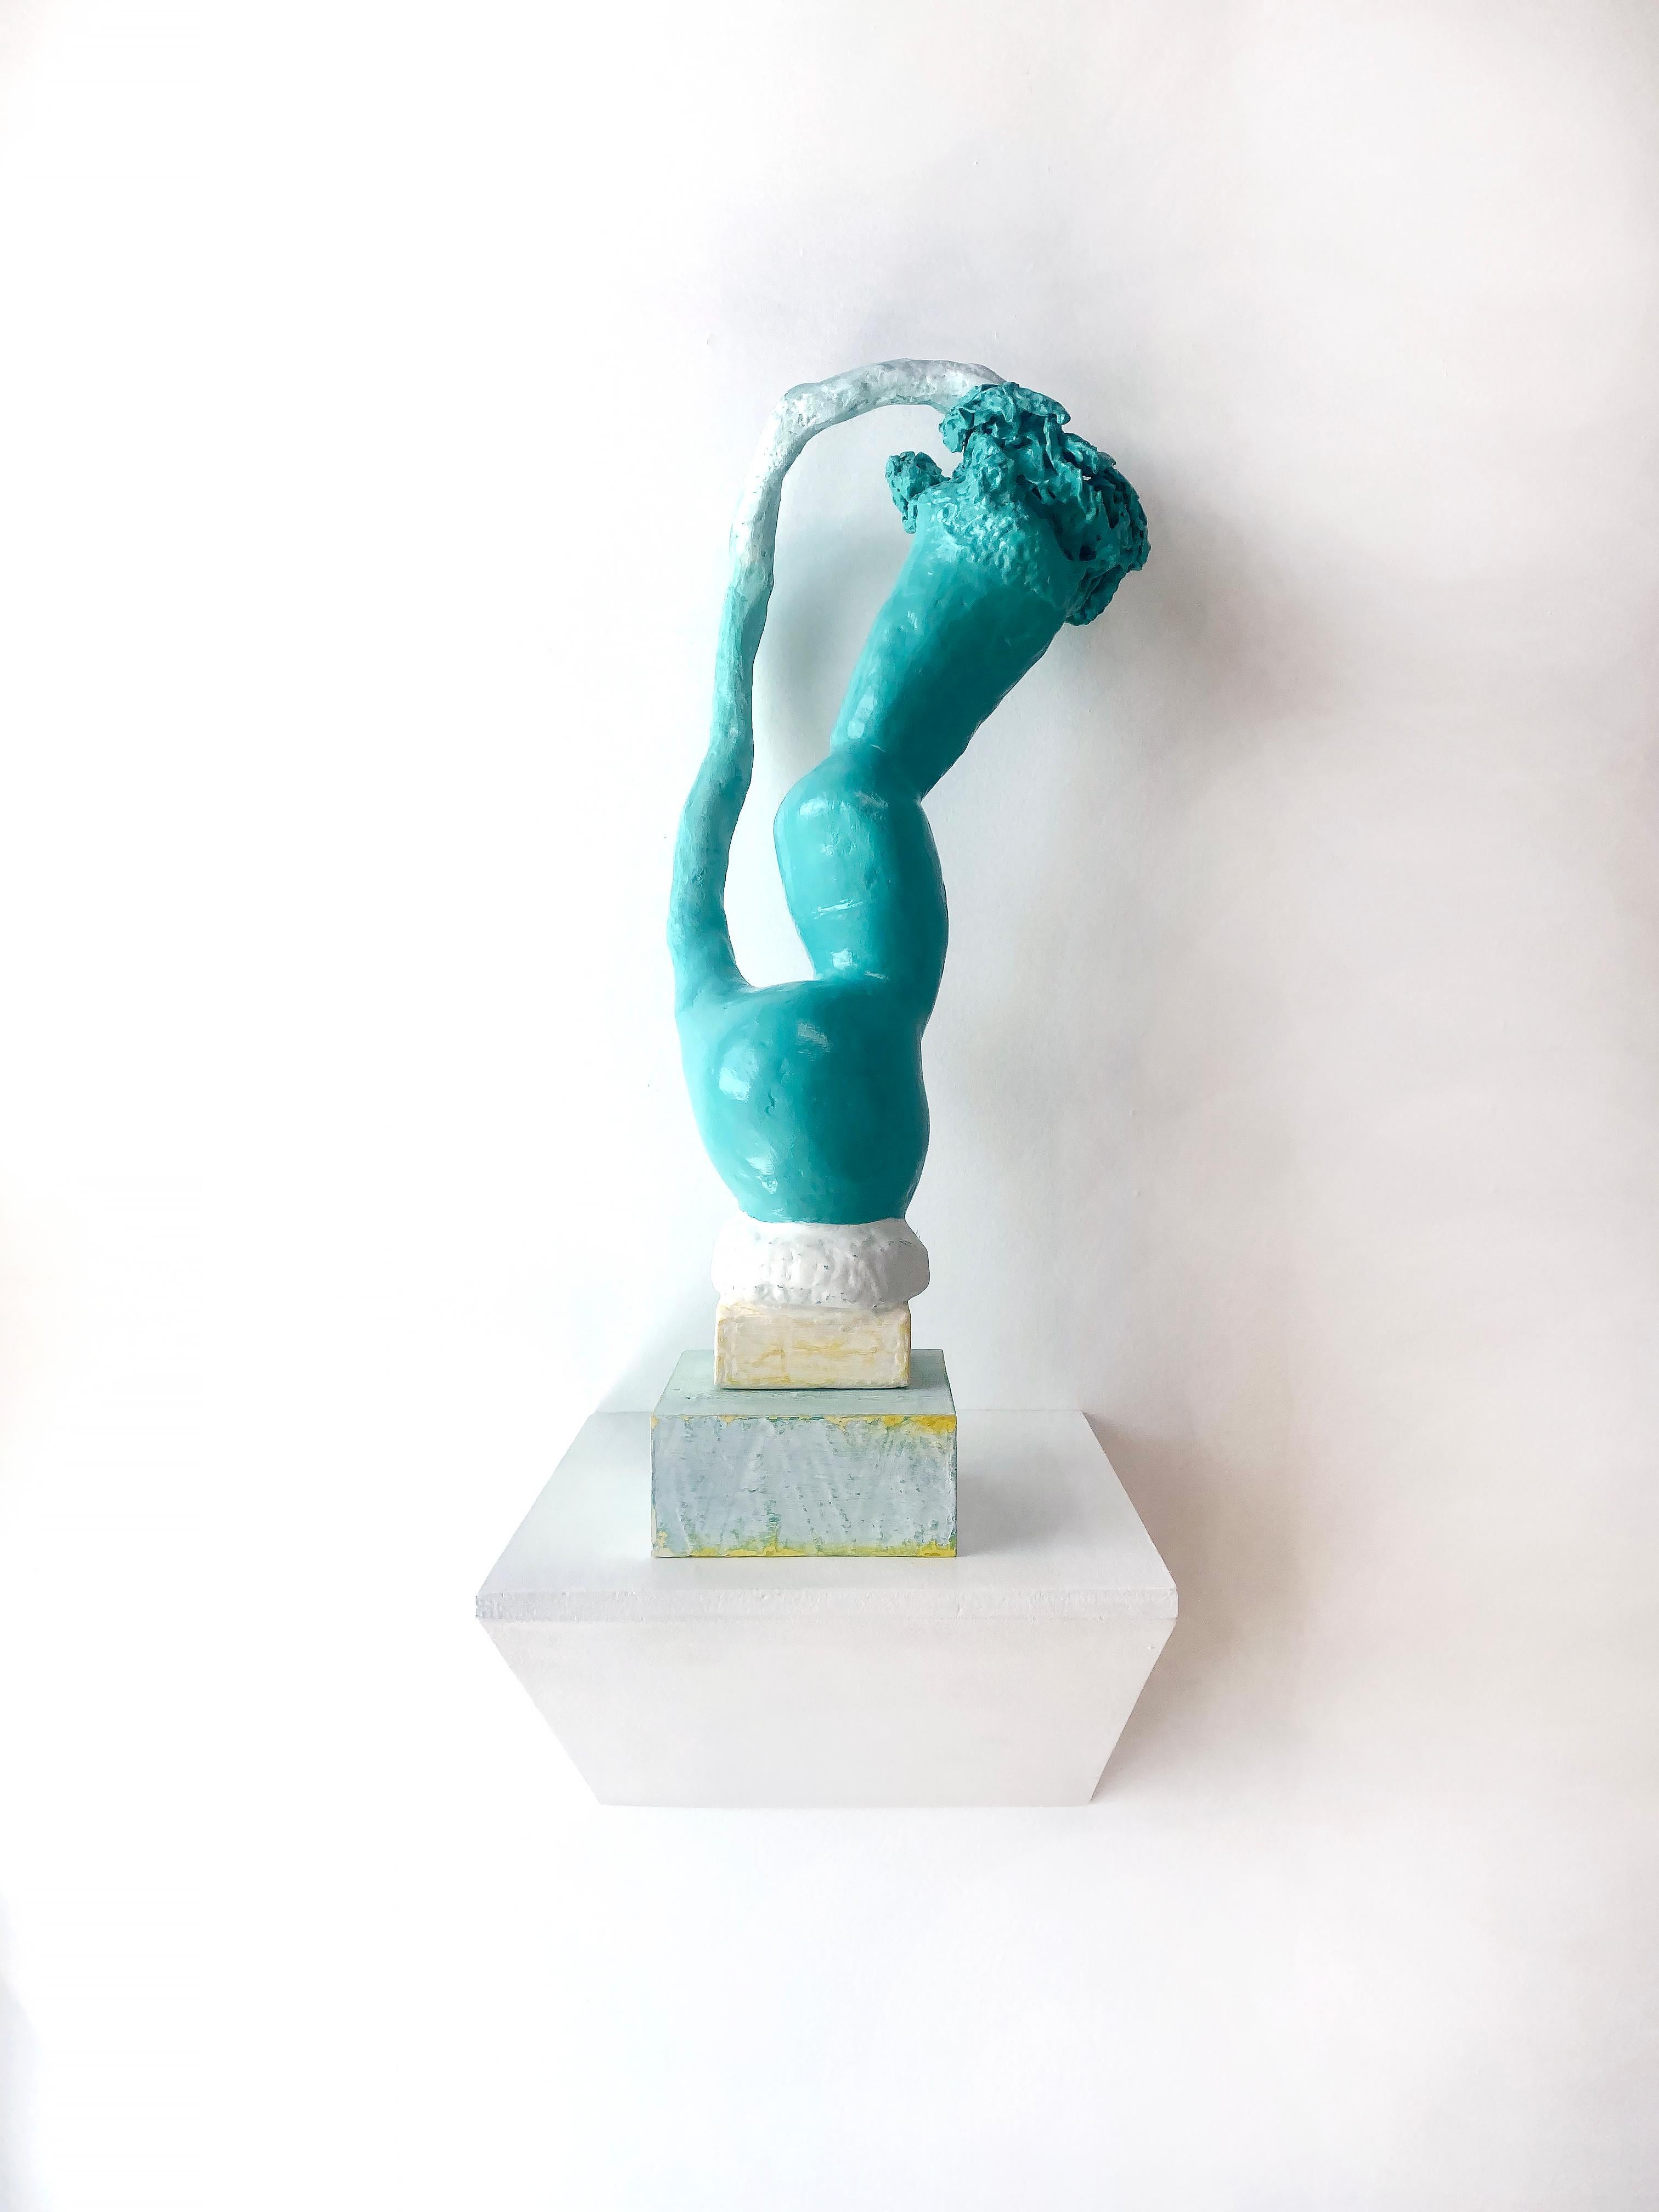 Roberley Bell Abstract Sculpture - Contemporary Conceptual Ceramic Sculpture Turquoise Female Artist Unique Object